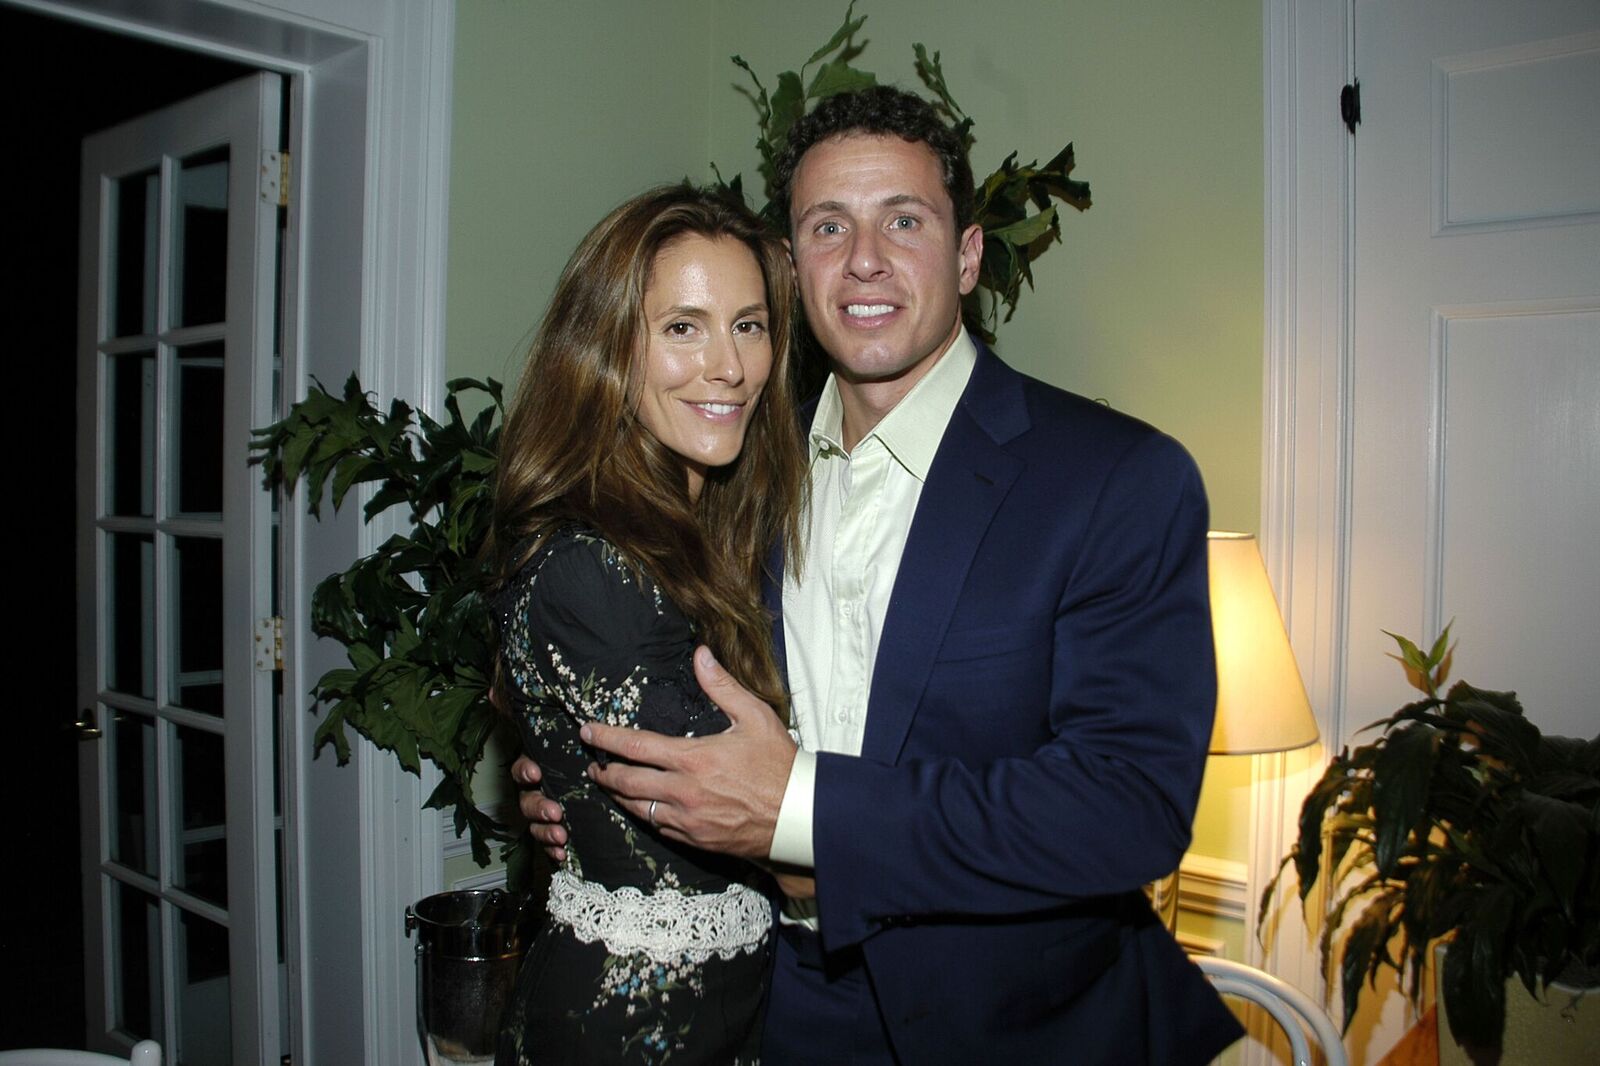 Cristina Greeven and Chris Cuomo at NATURA BISSE Dinner in honor of Greeven's ambassadorship of the skin products on August 17, 2007, in Southampton, New York | Photo: Patrick McMullan/Getty Images